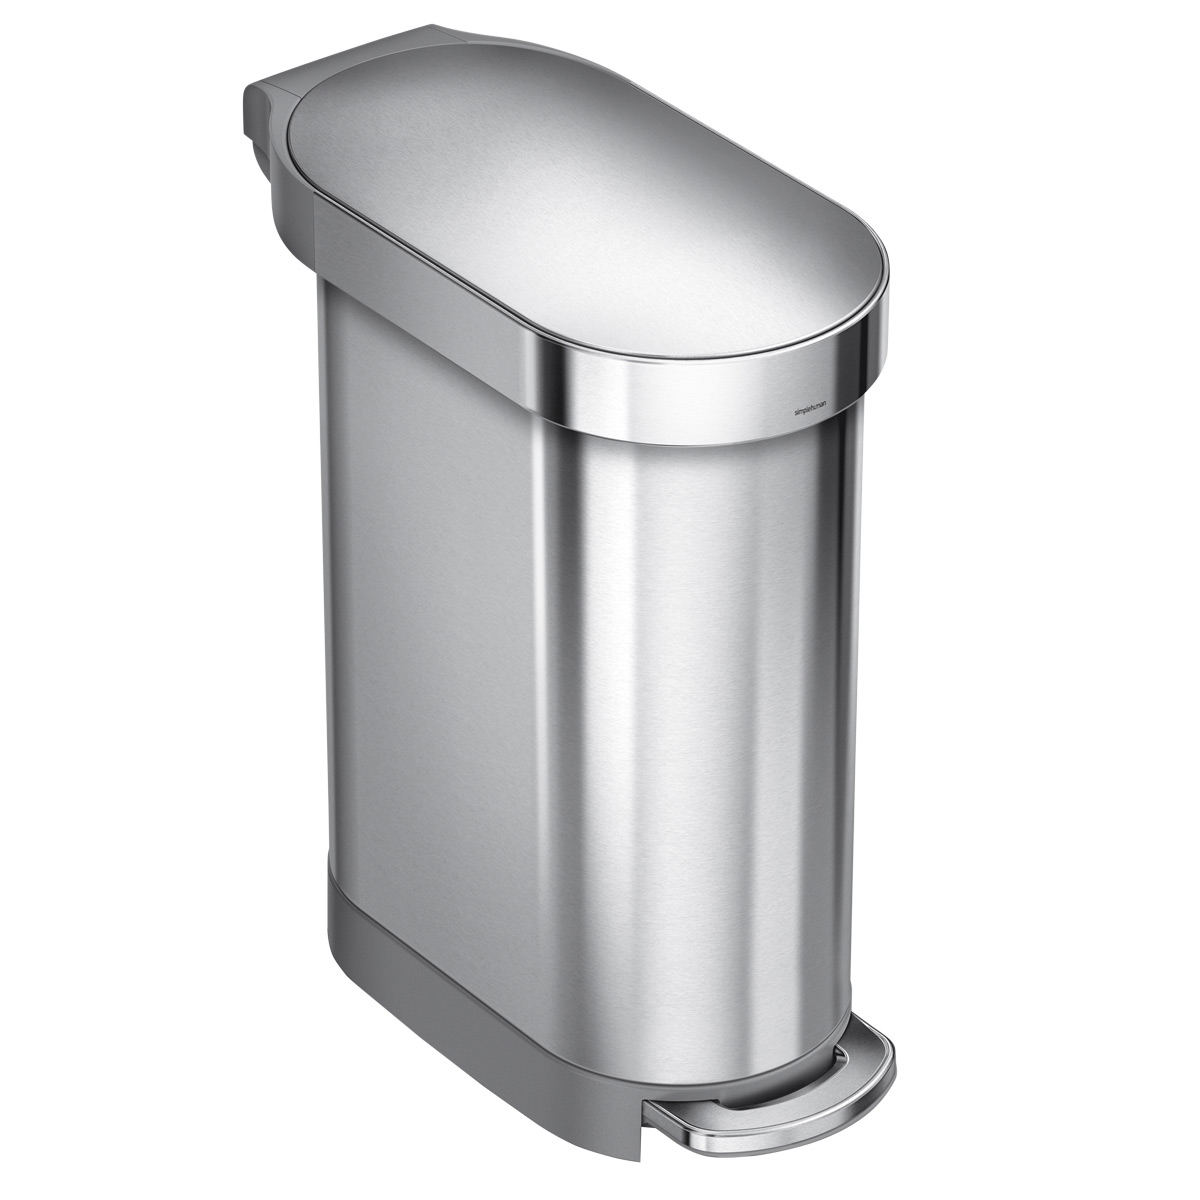 https://www.containerstore.com/catalogimages/378660/10071719-slim-step-can-stainless-VEN.jpg